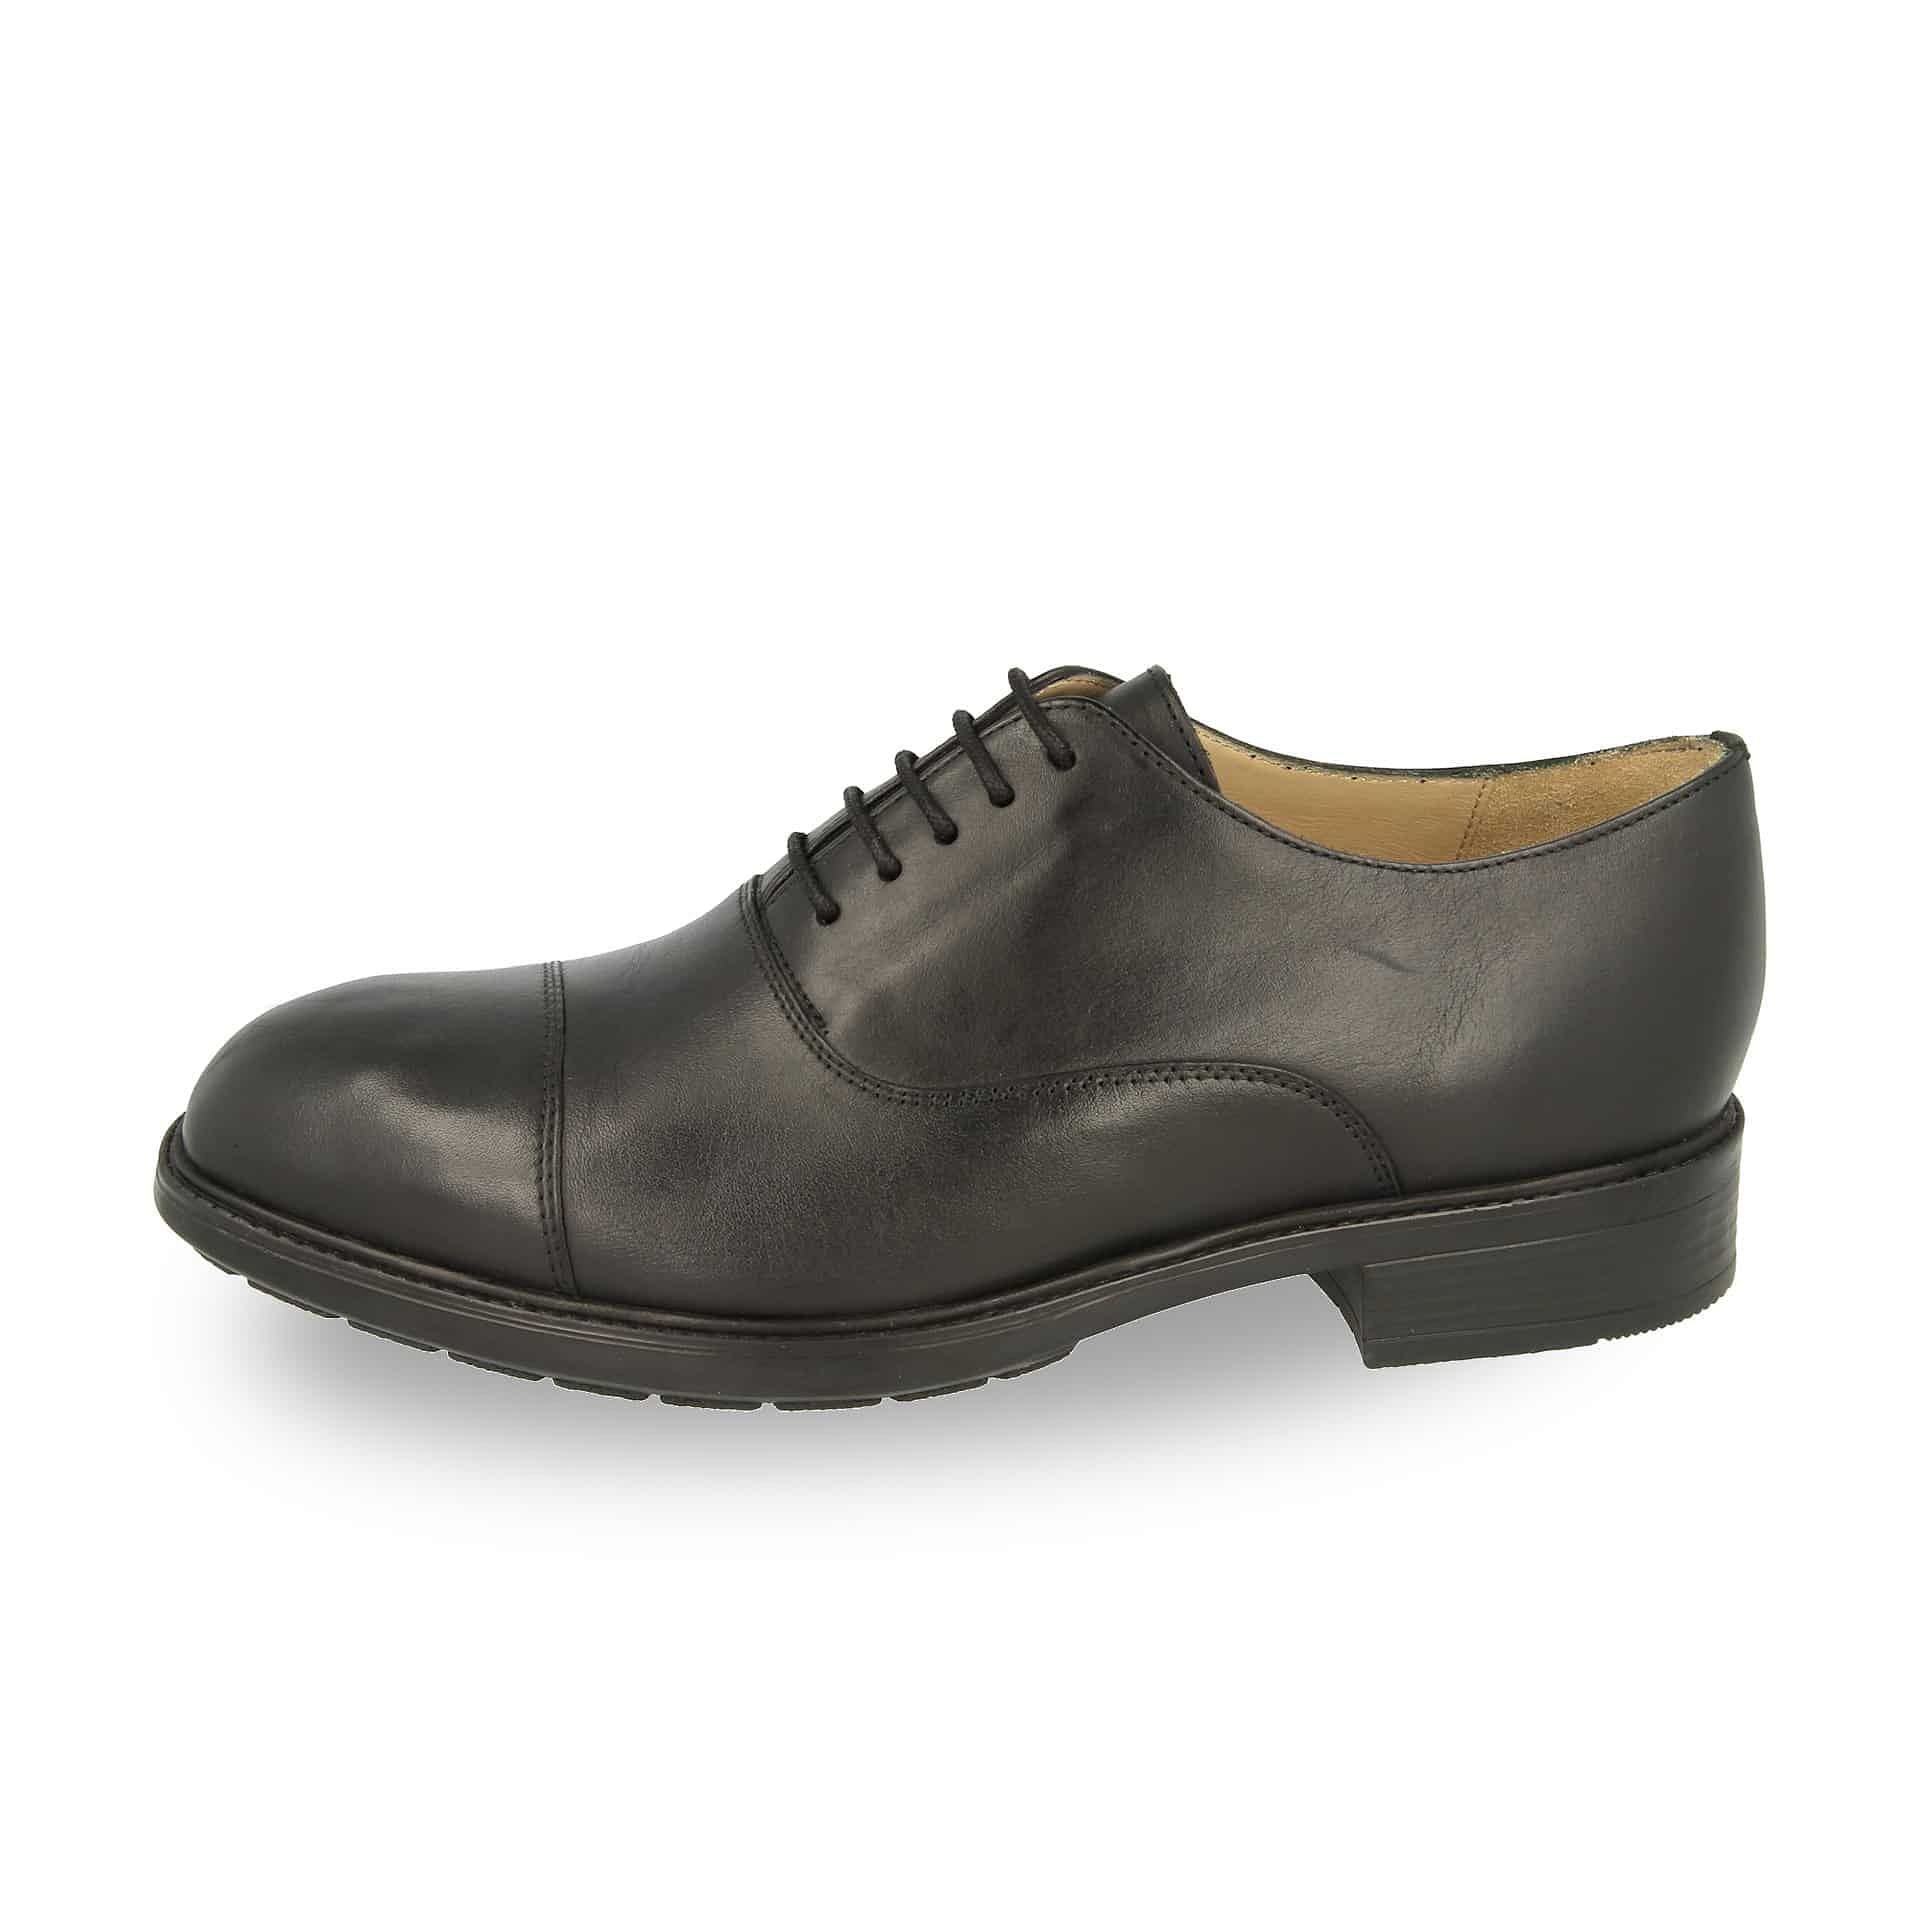 black wide fit work shoes